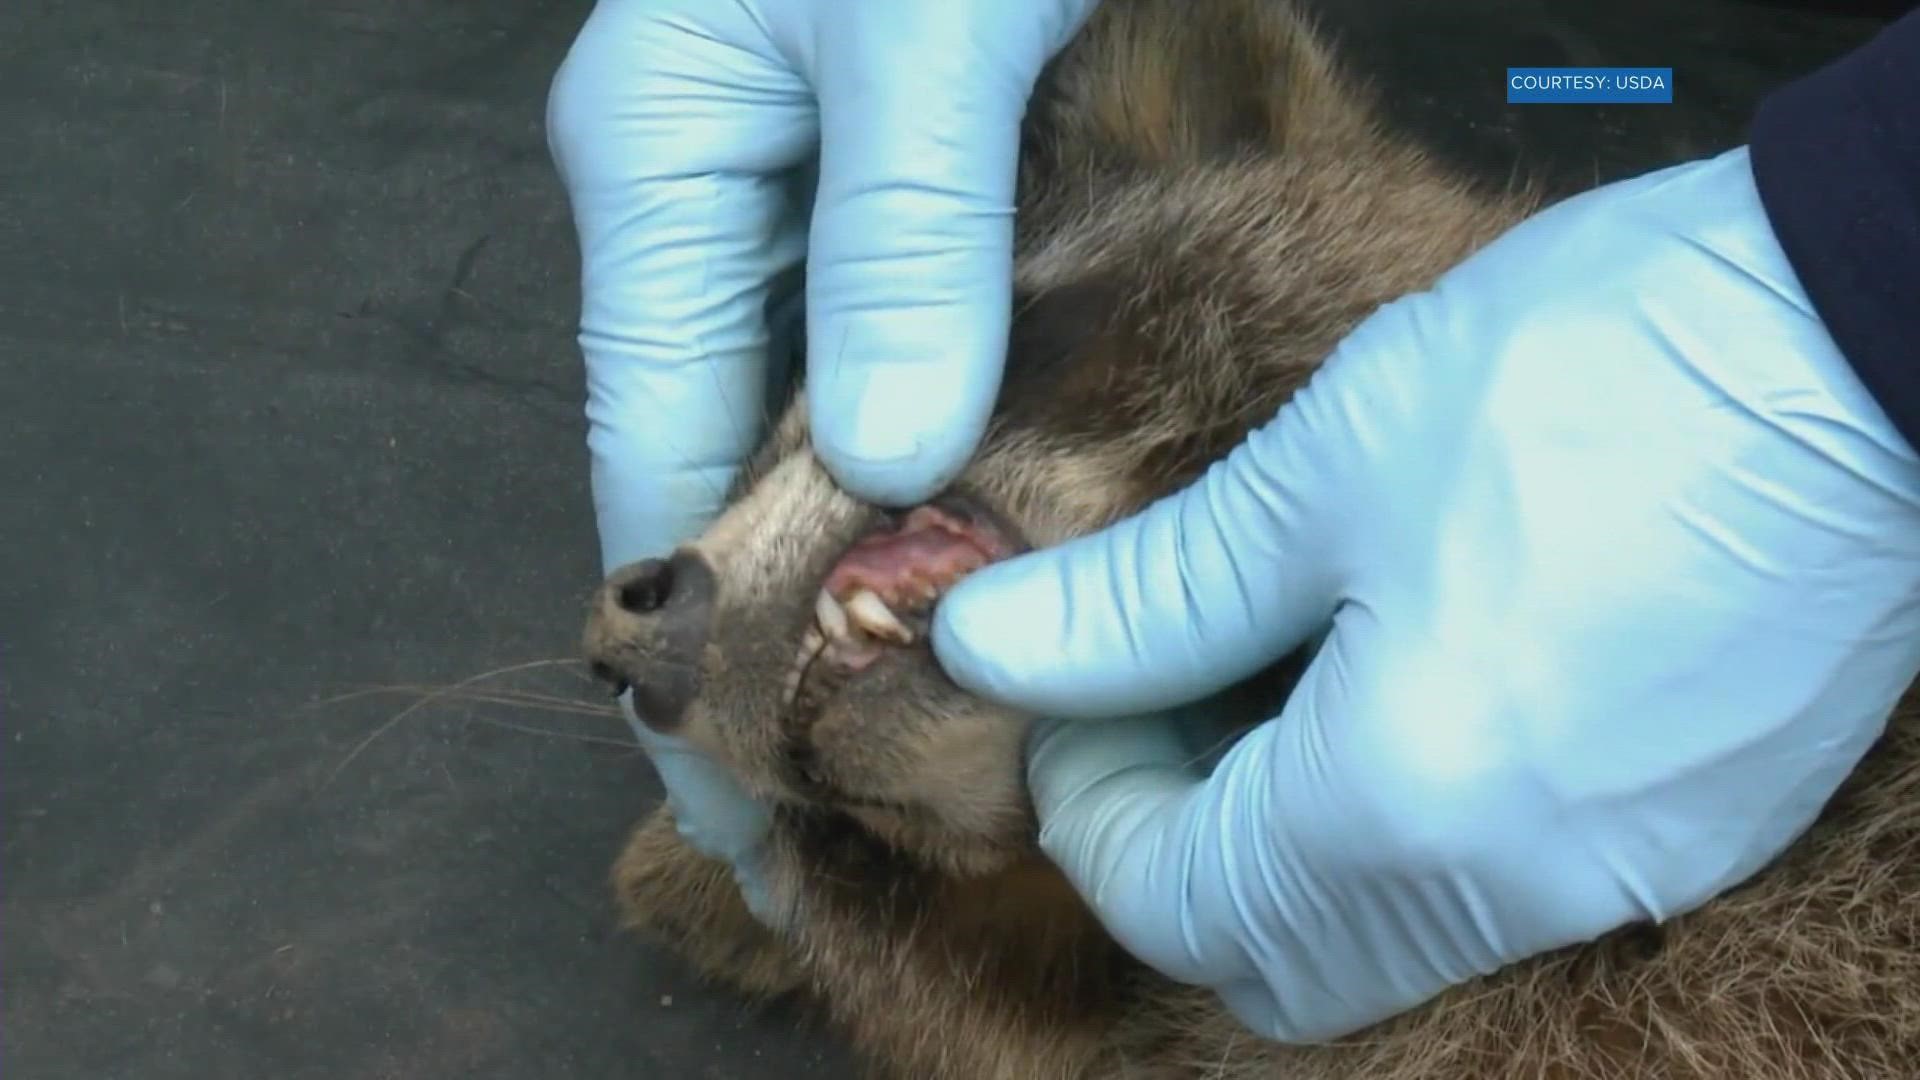 Crews will fly over Tennessee's rural wilderness dropping rabies vaccine packets coated with bait in hopes the raccoons will eat them.